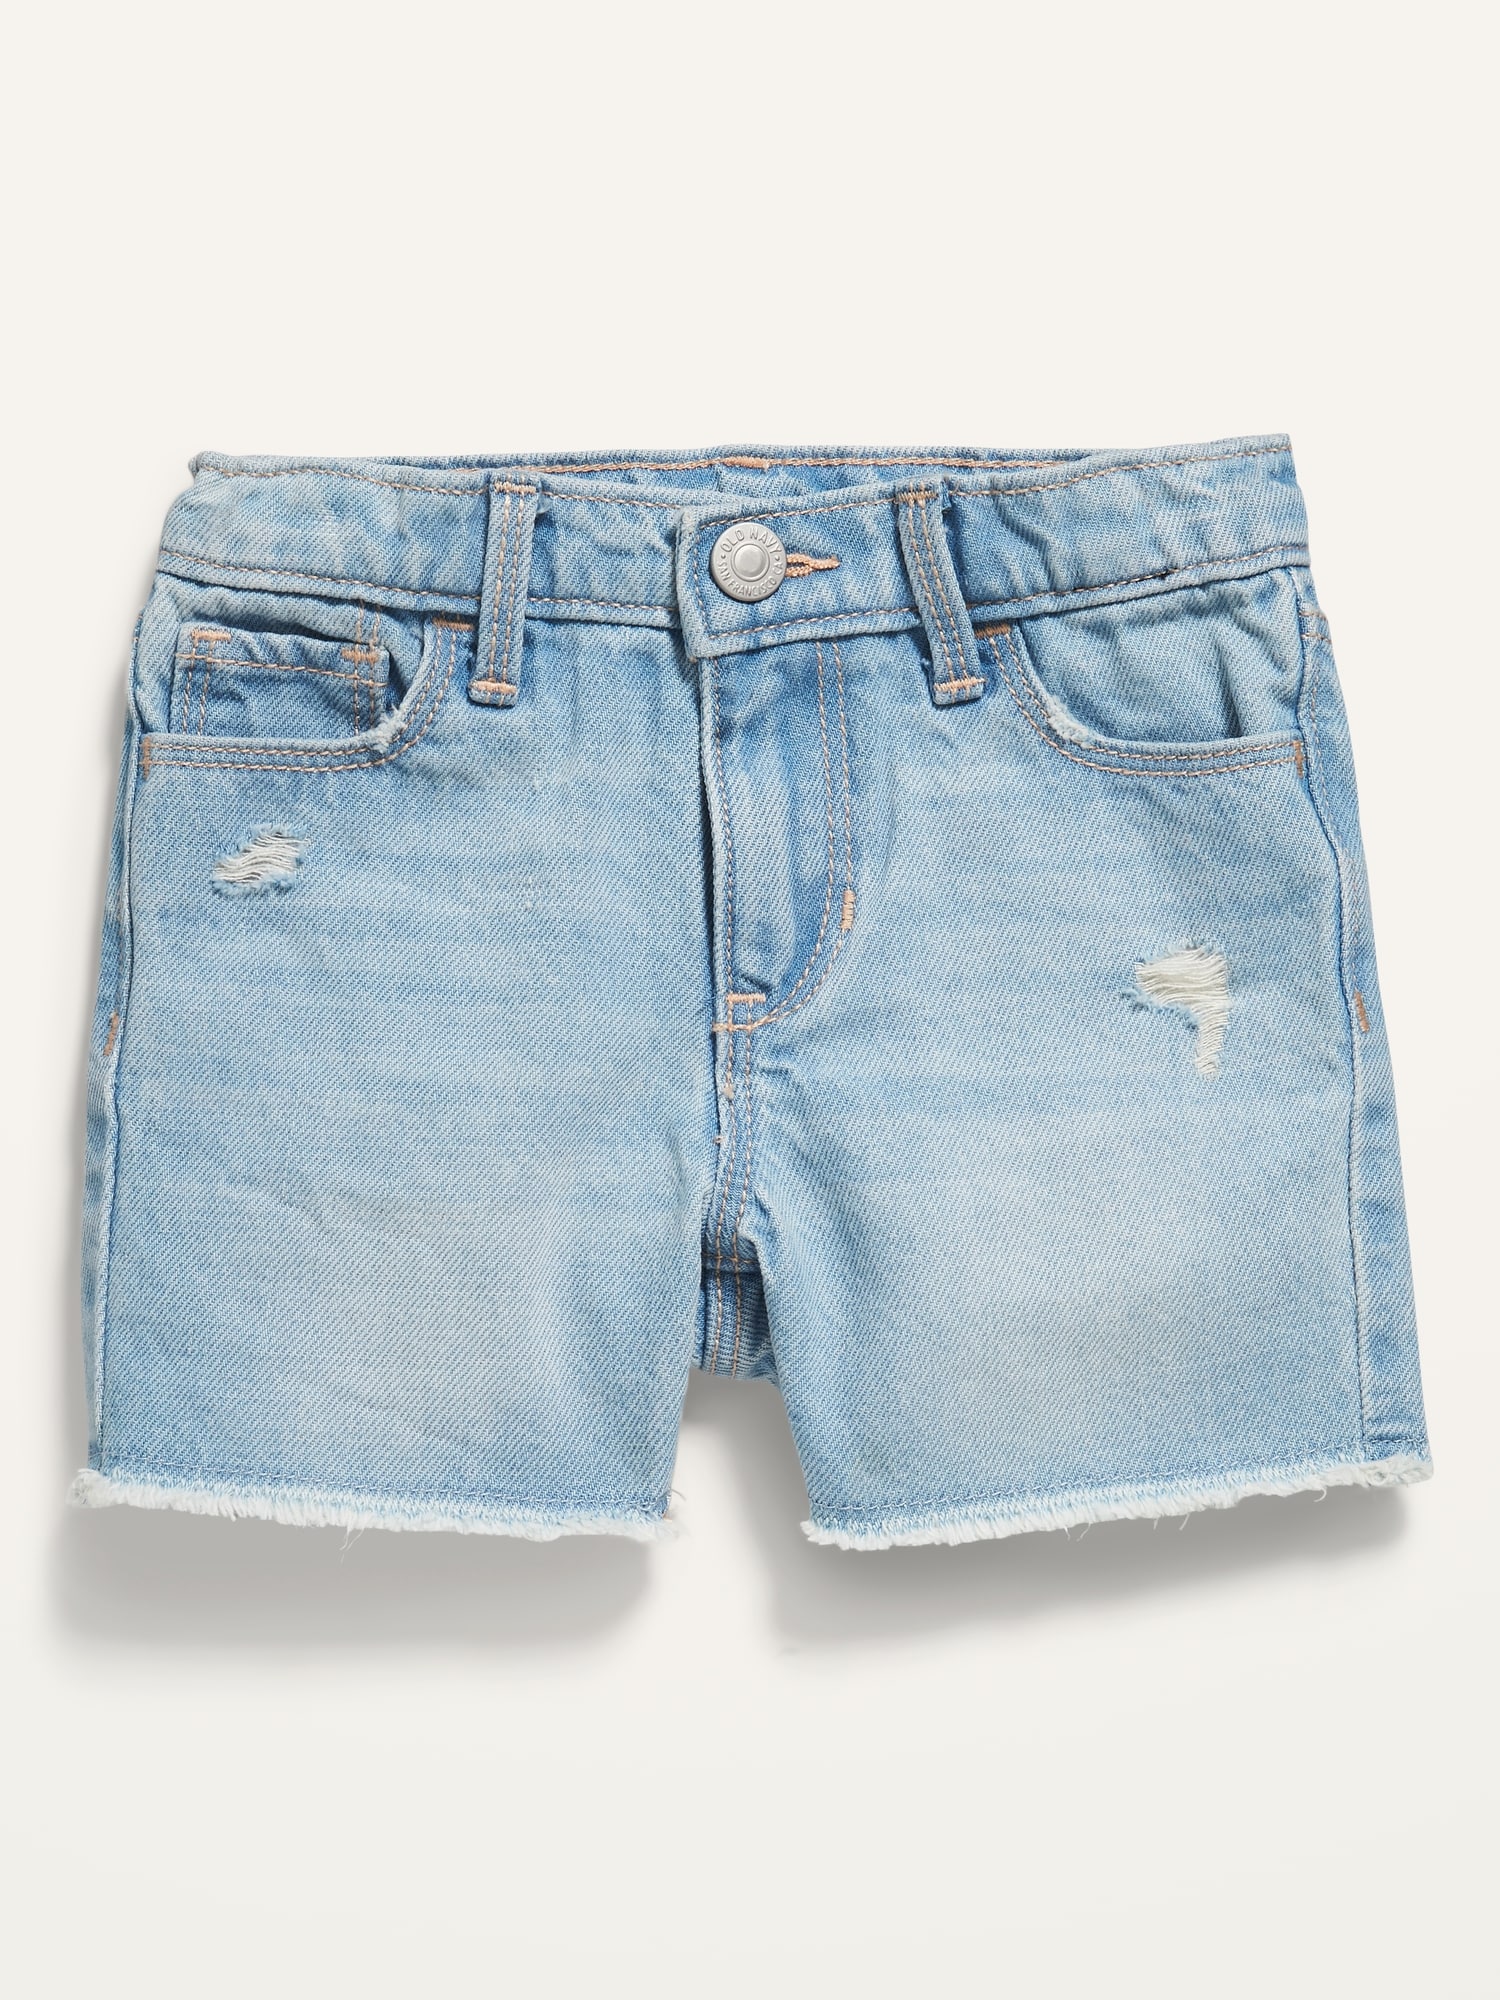 Light-Wash Ripped Jean Cut-Off Shorts for Toddler Girls | Old Navy